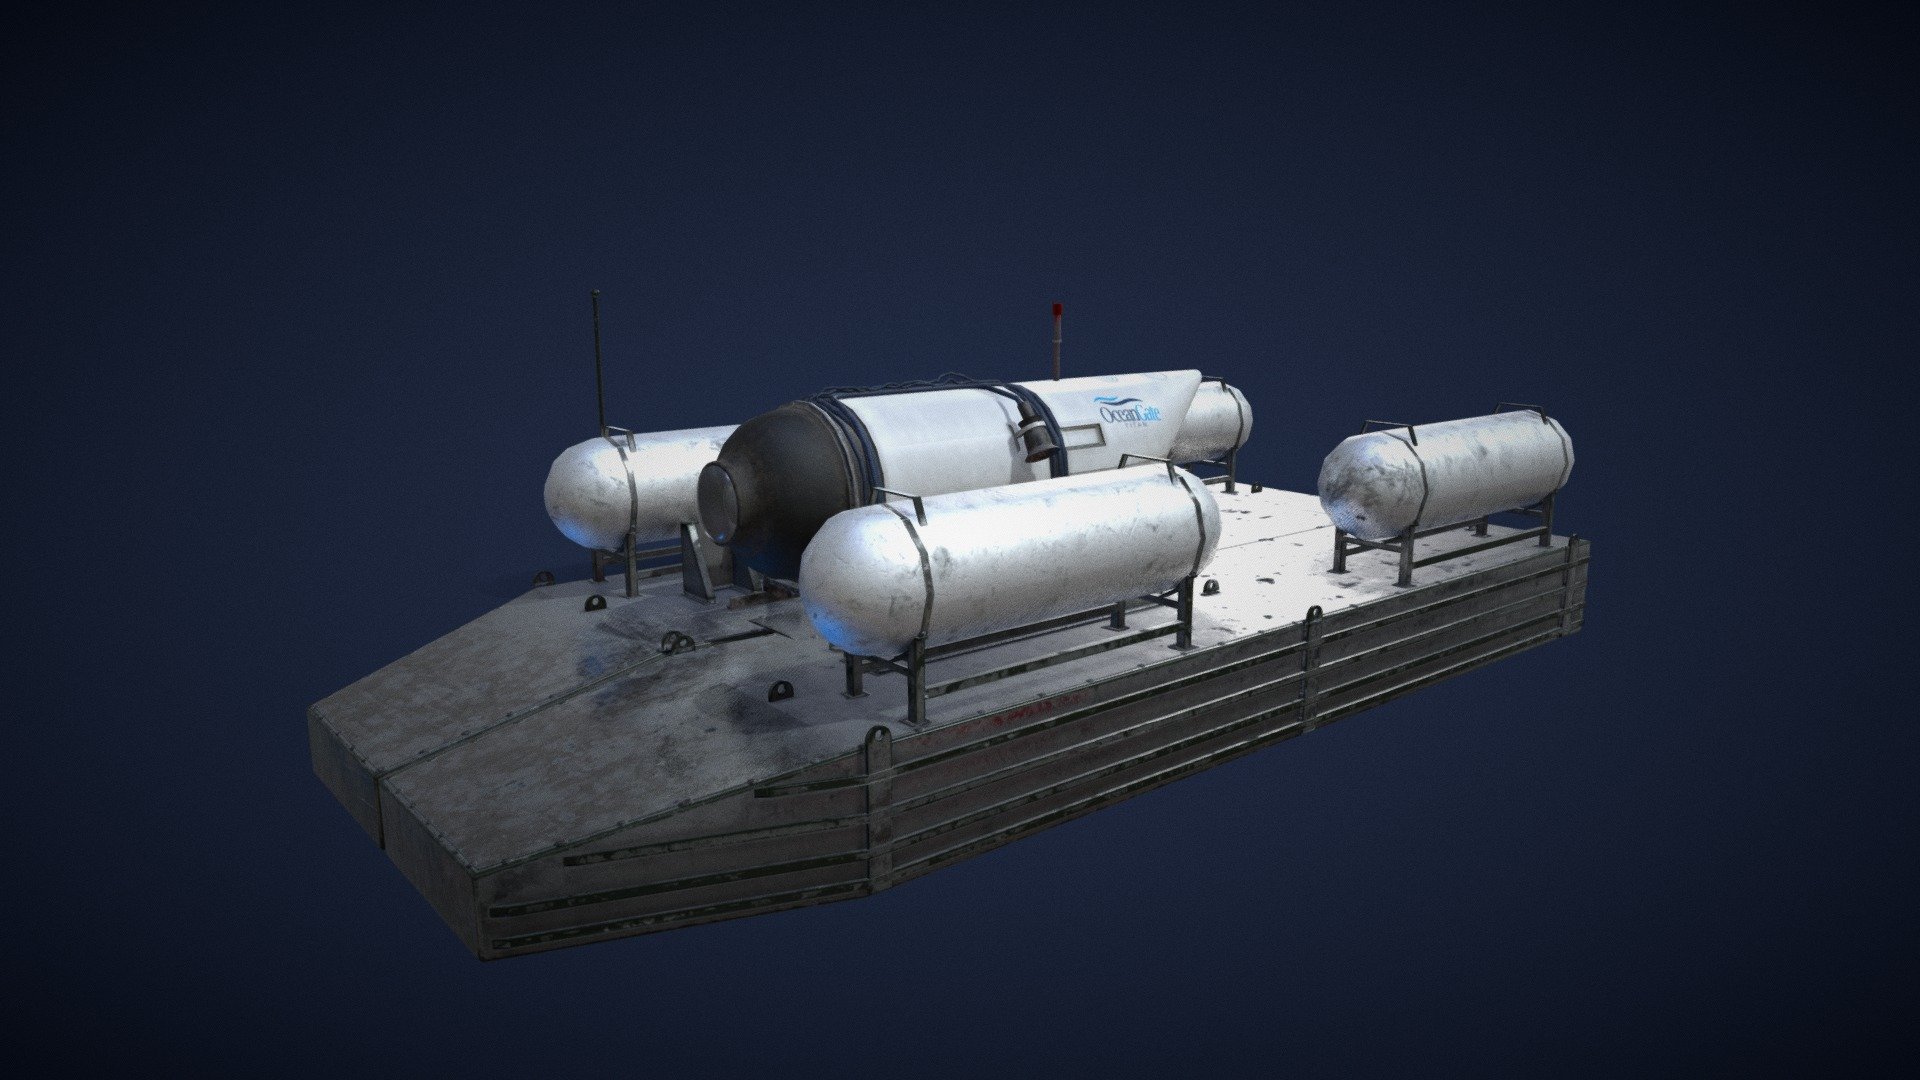 Submarine Titan (OceanGate)

Model made in 3ds max.

Textures made with substance 3d painter. 




Updated: Oxygen bottle and other small details.

Updated: Platform (Modeled separately.).

Rest in peace 3d model